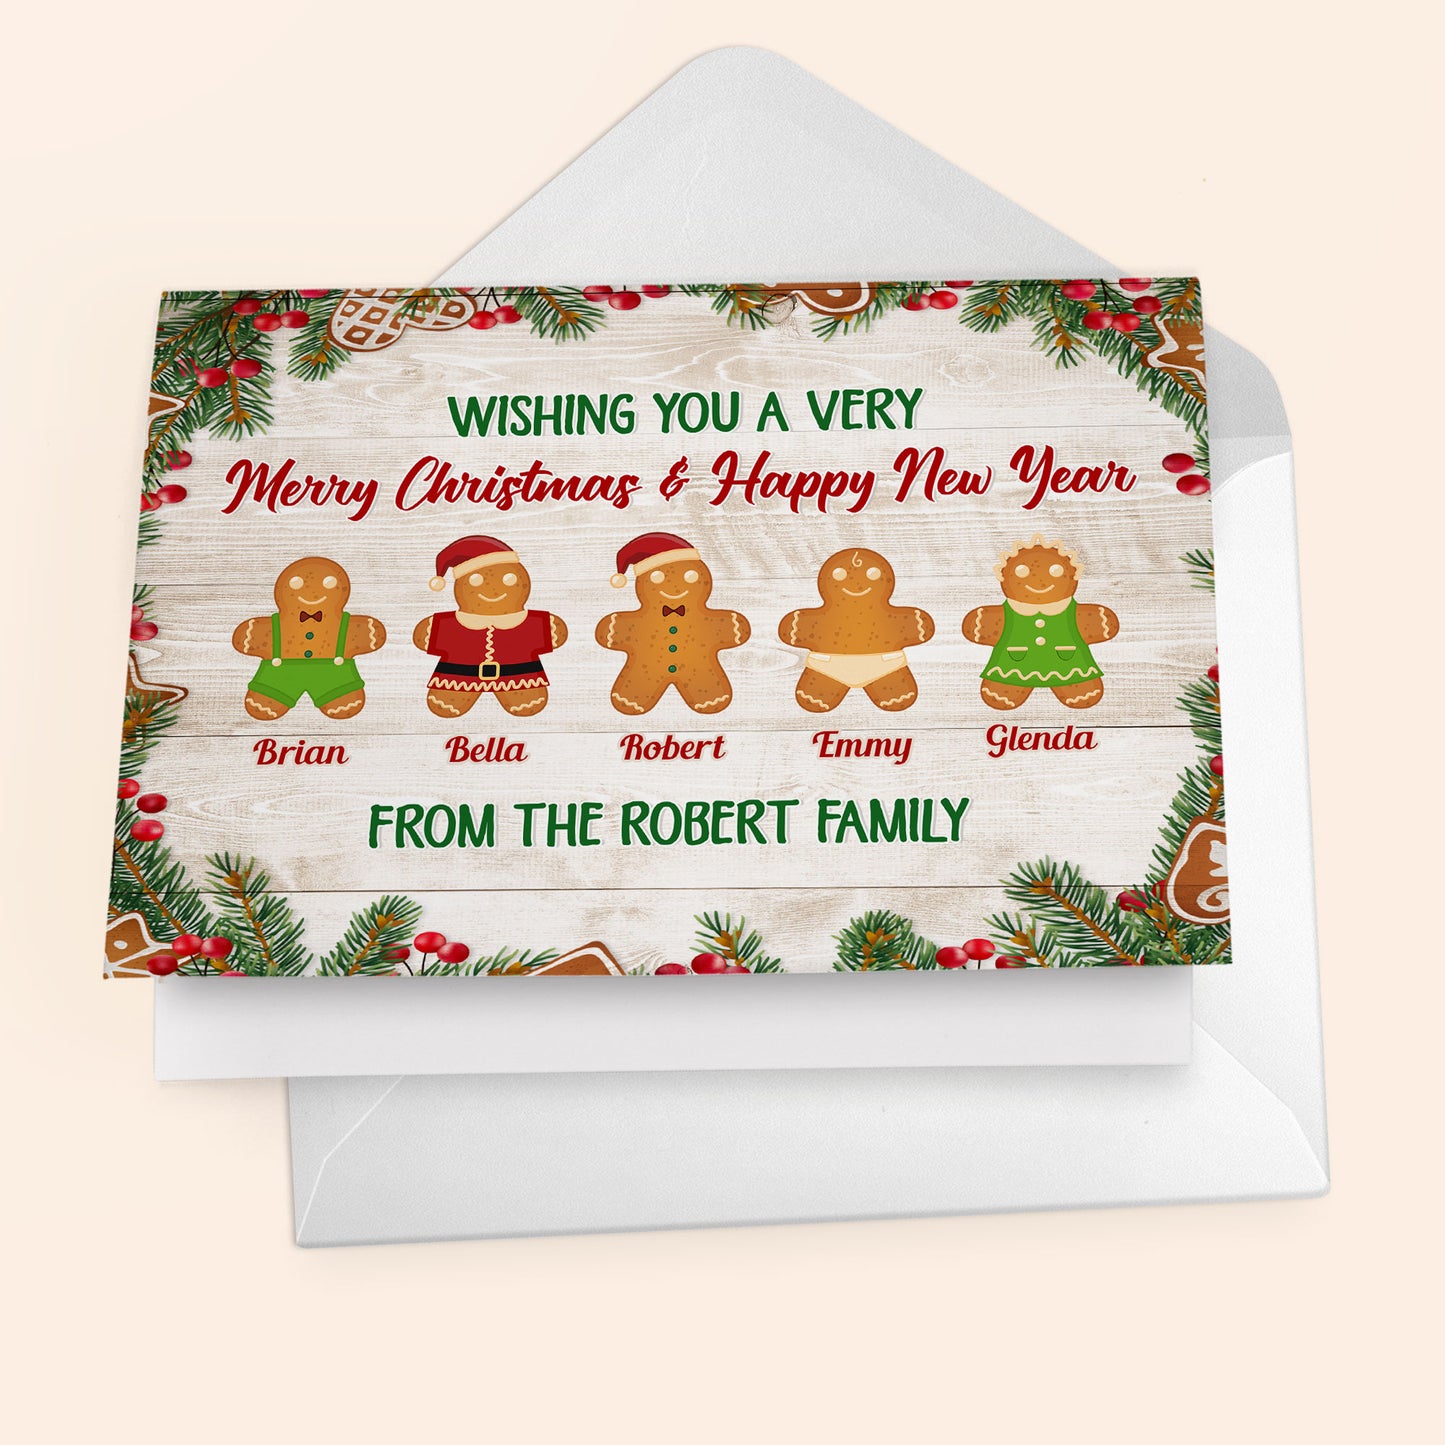 There's No Place Like Home For The Holidays - Personalized Folded Card - Christmas Gift For Family, Friends, Love Ones - Gingerbreads